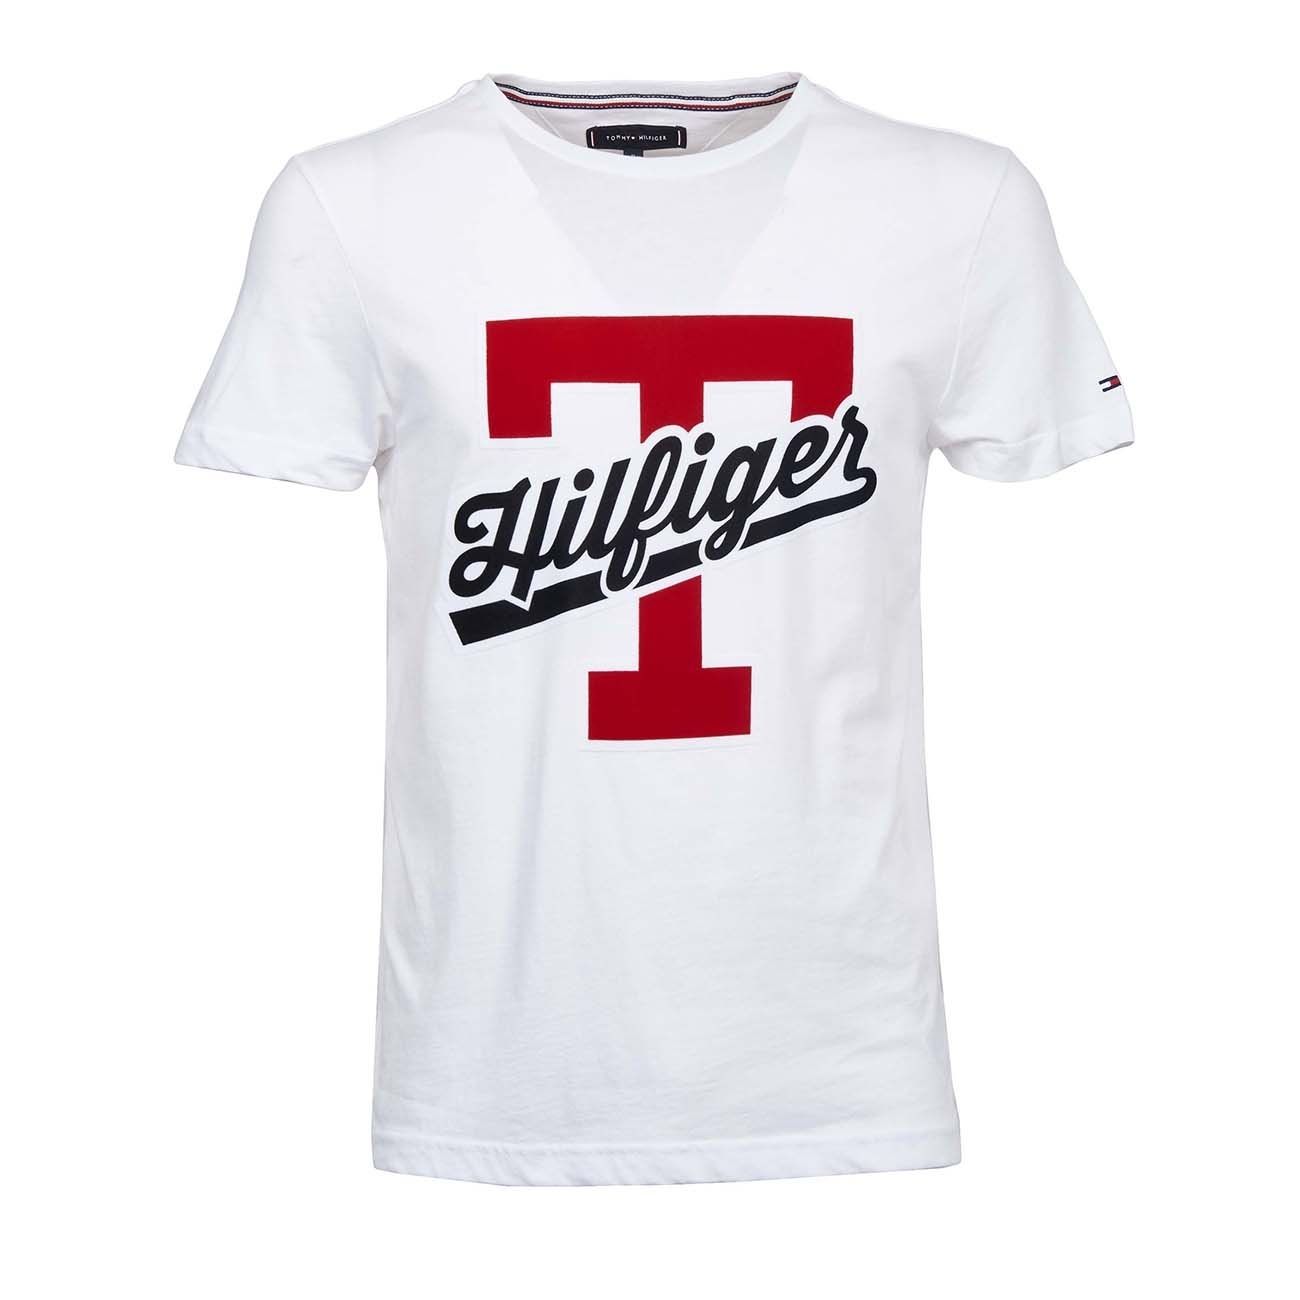 black white and red tommy hilfiger shirt